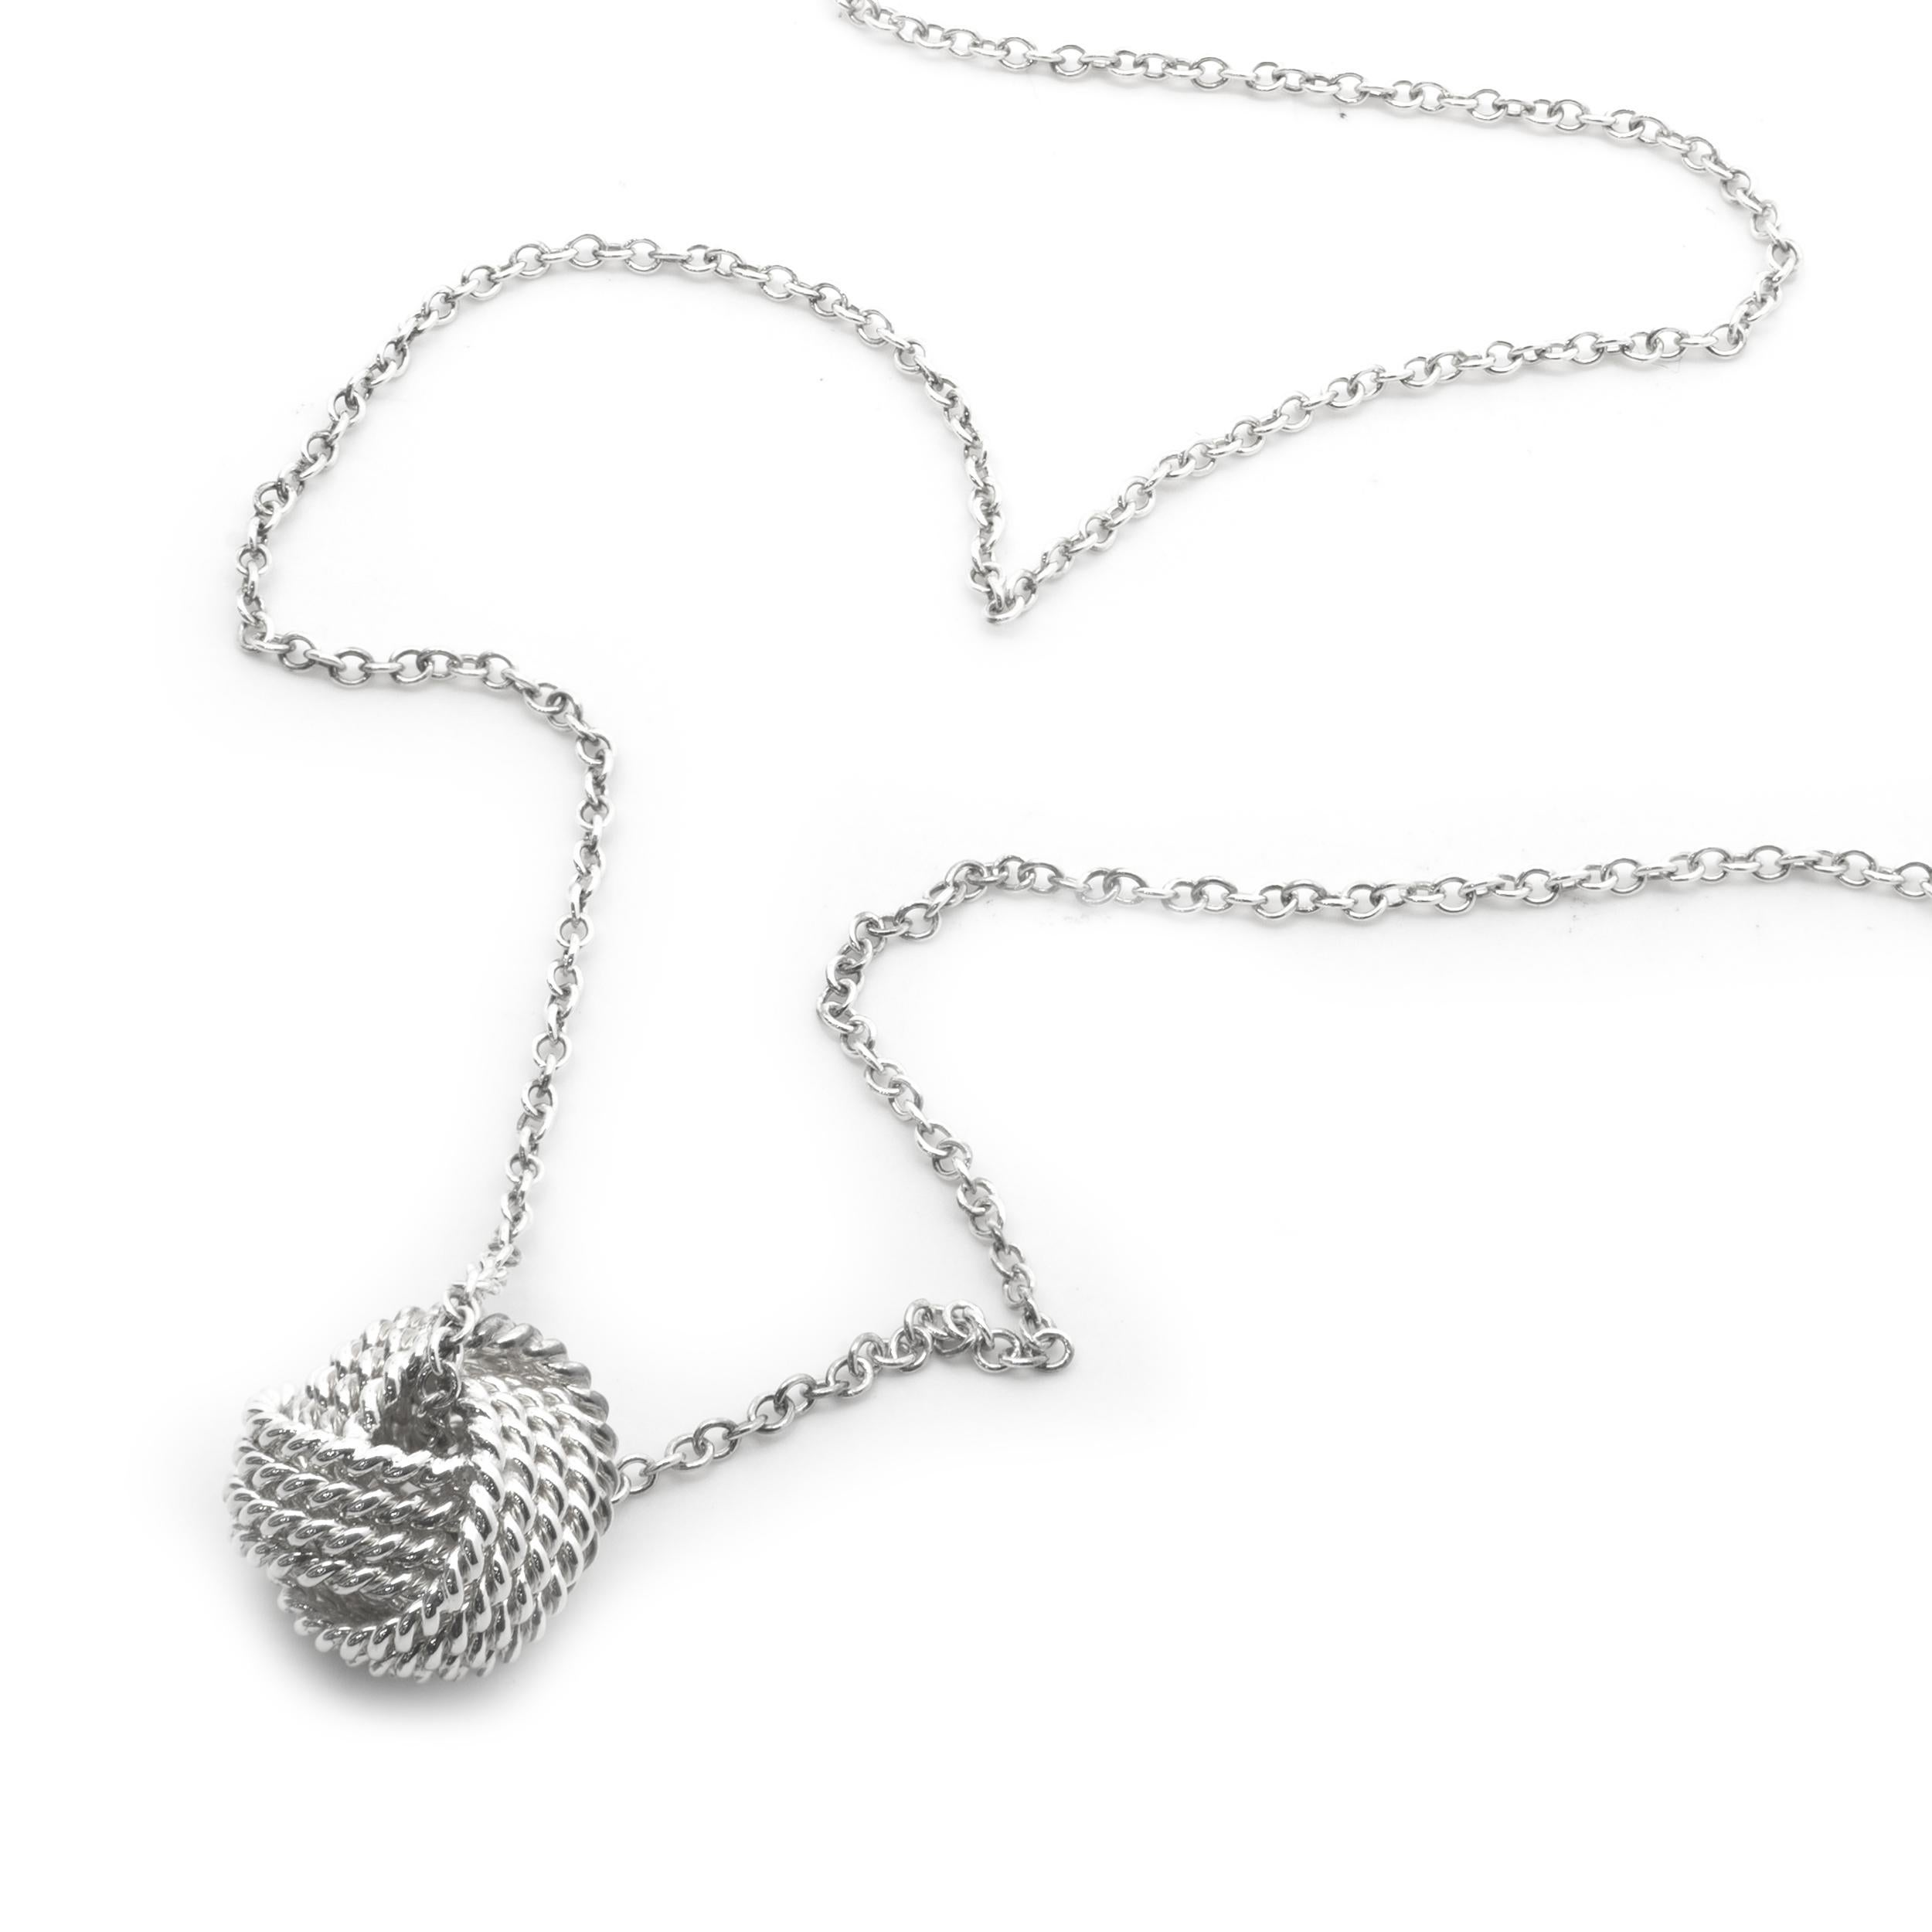 Designer: Tiffany & Co. 
Material: sterling silver
Dimensions: necklace measures 18-inches in length
Weight: 2.20 grams
